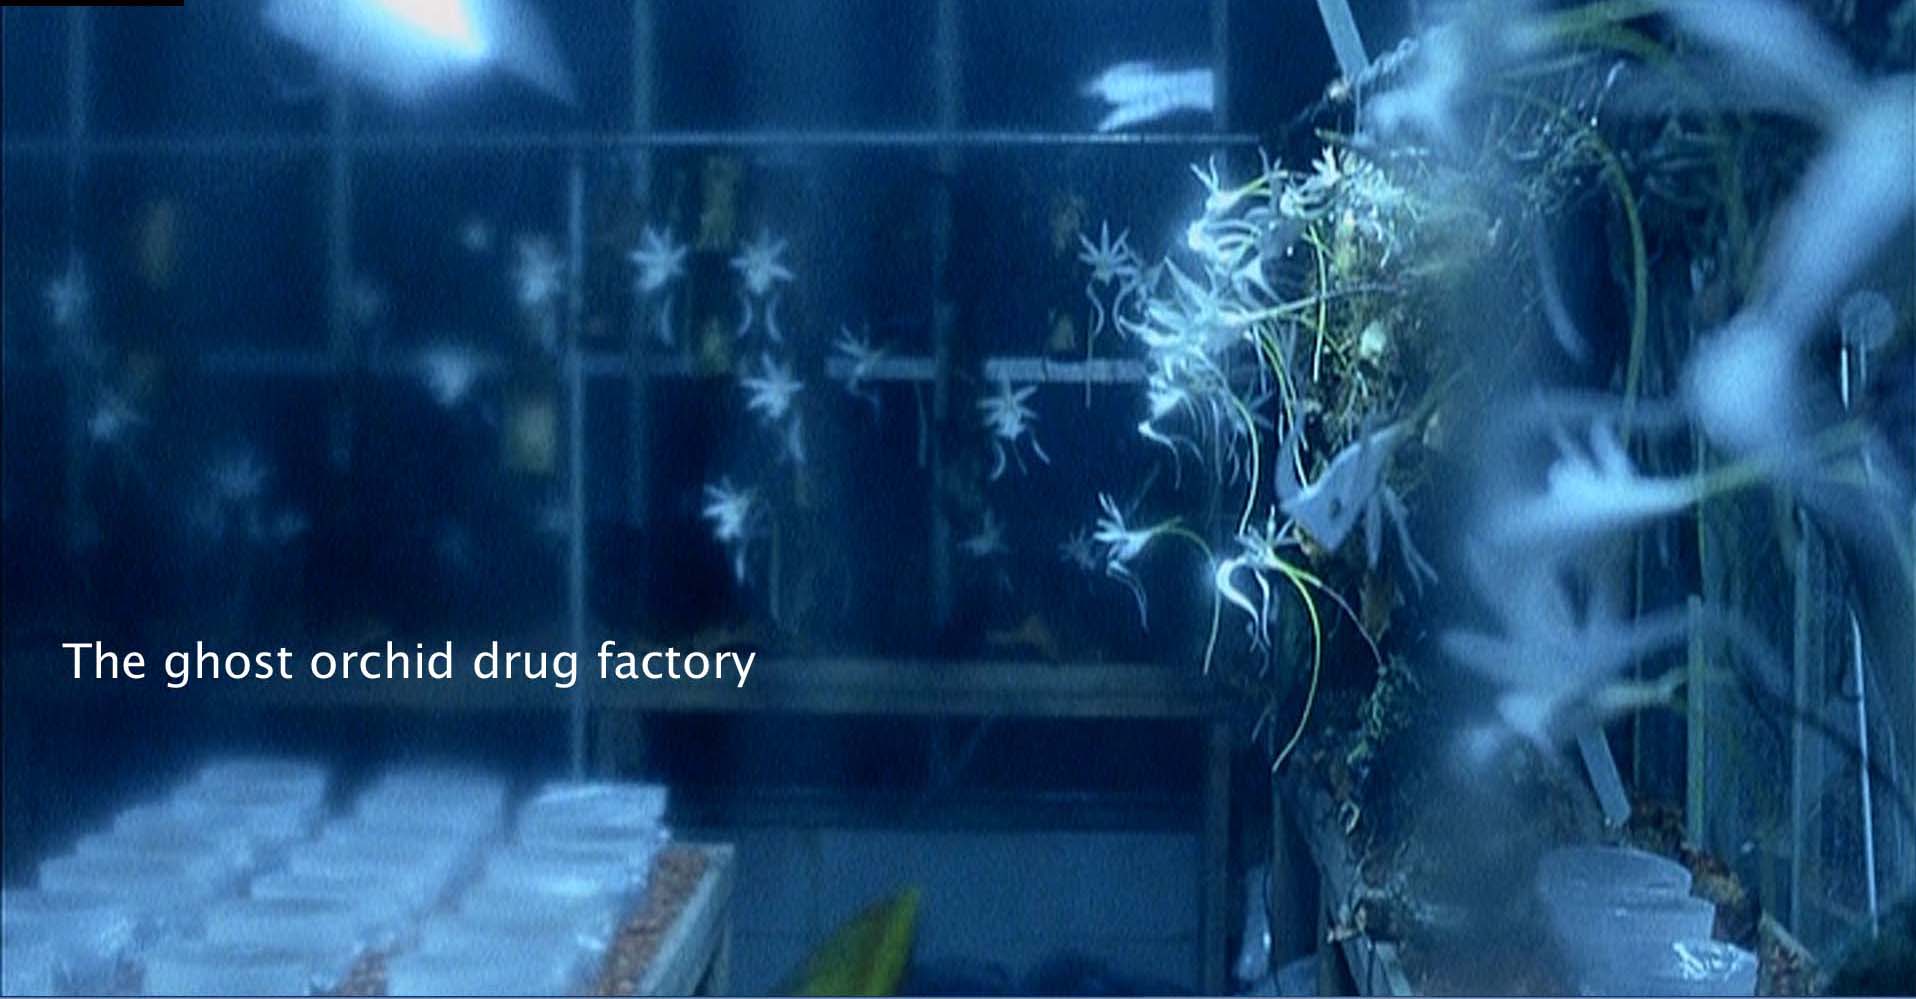 The ghost orchid drug factory